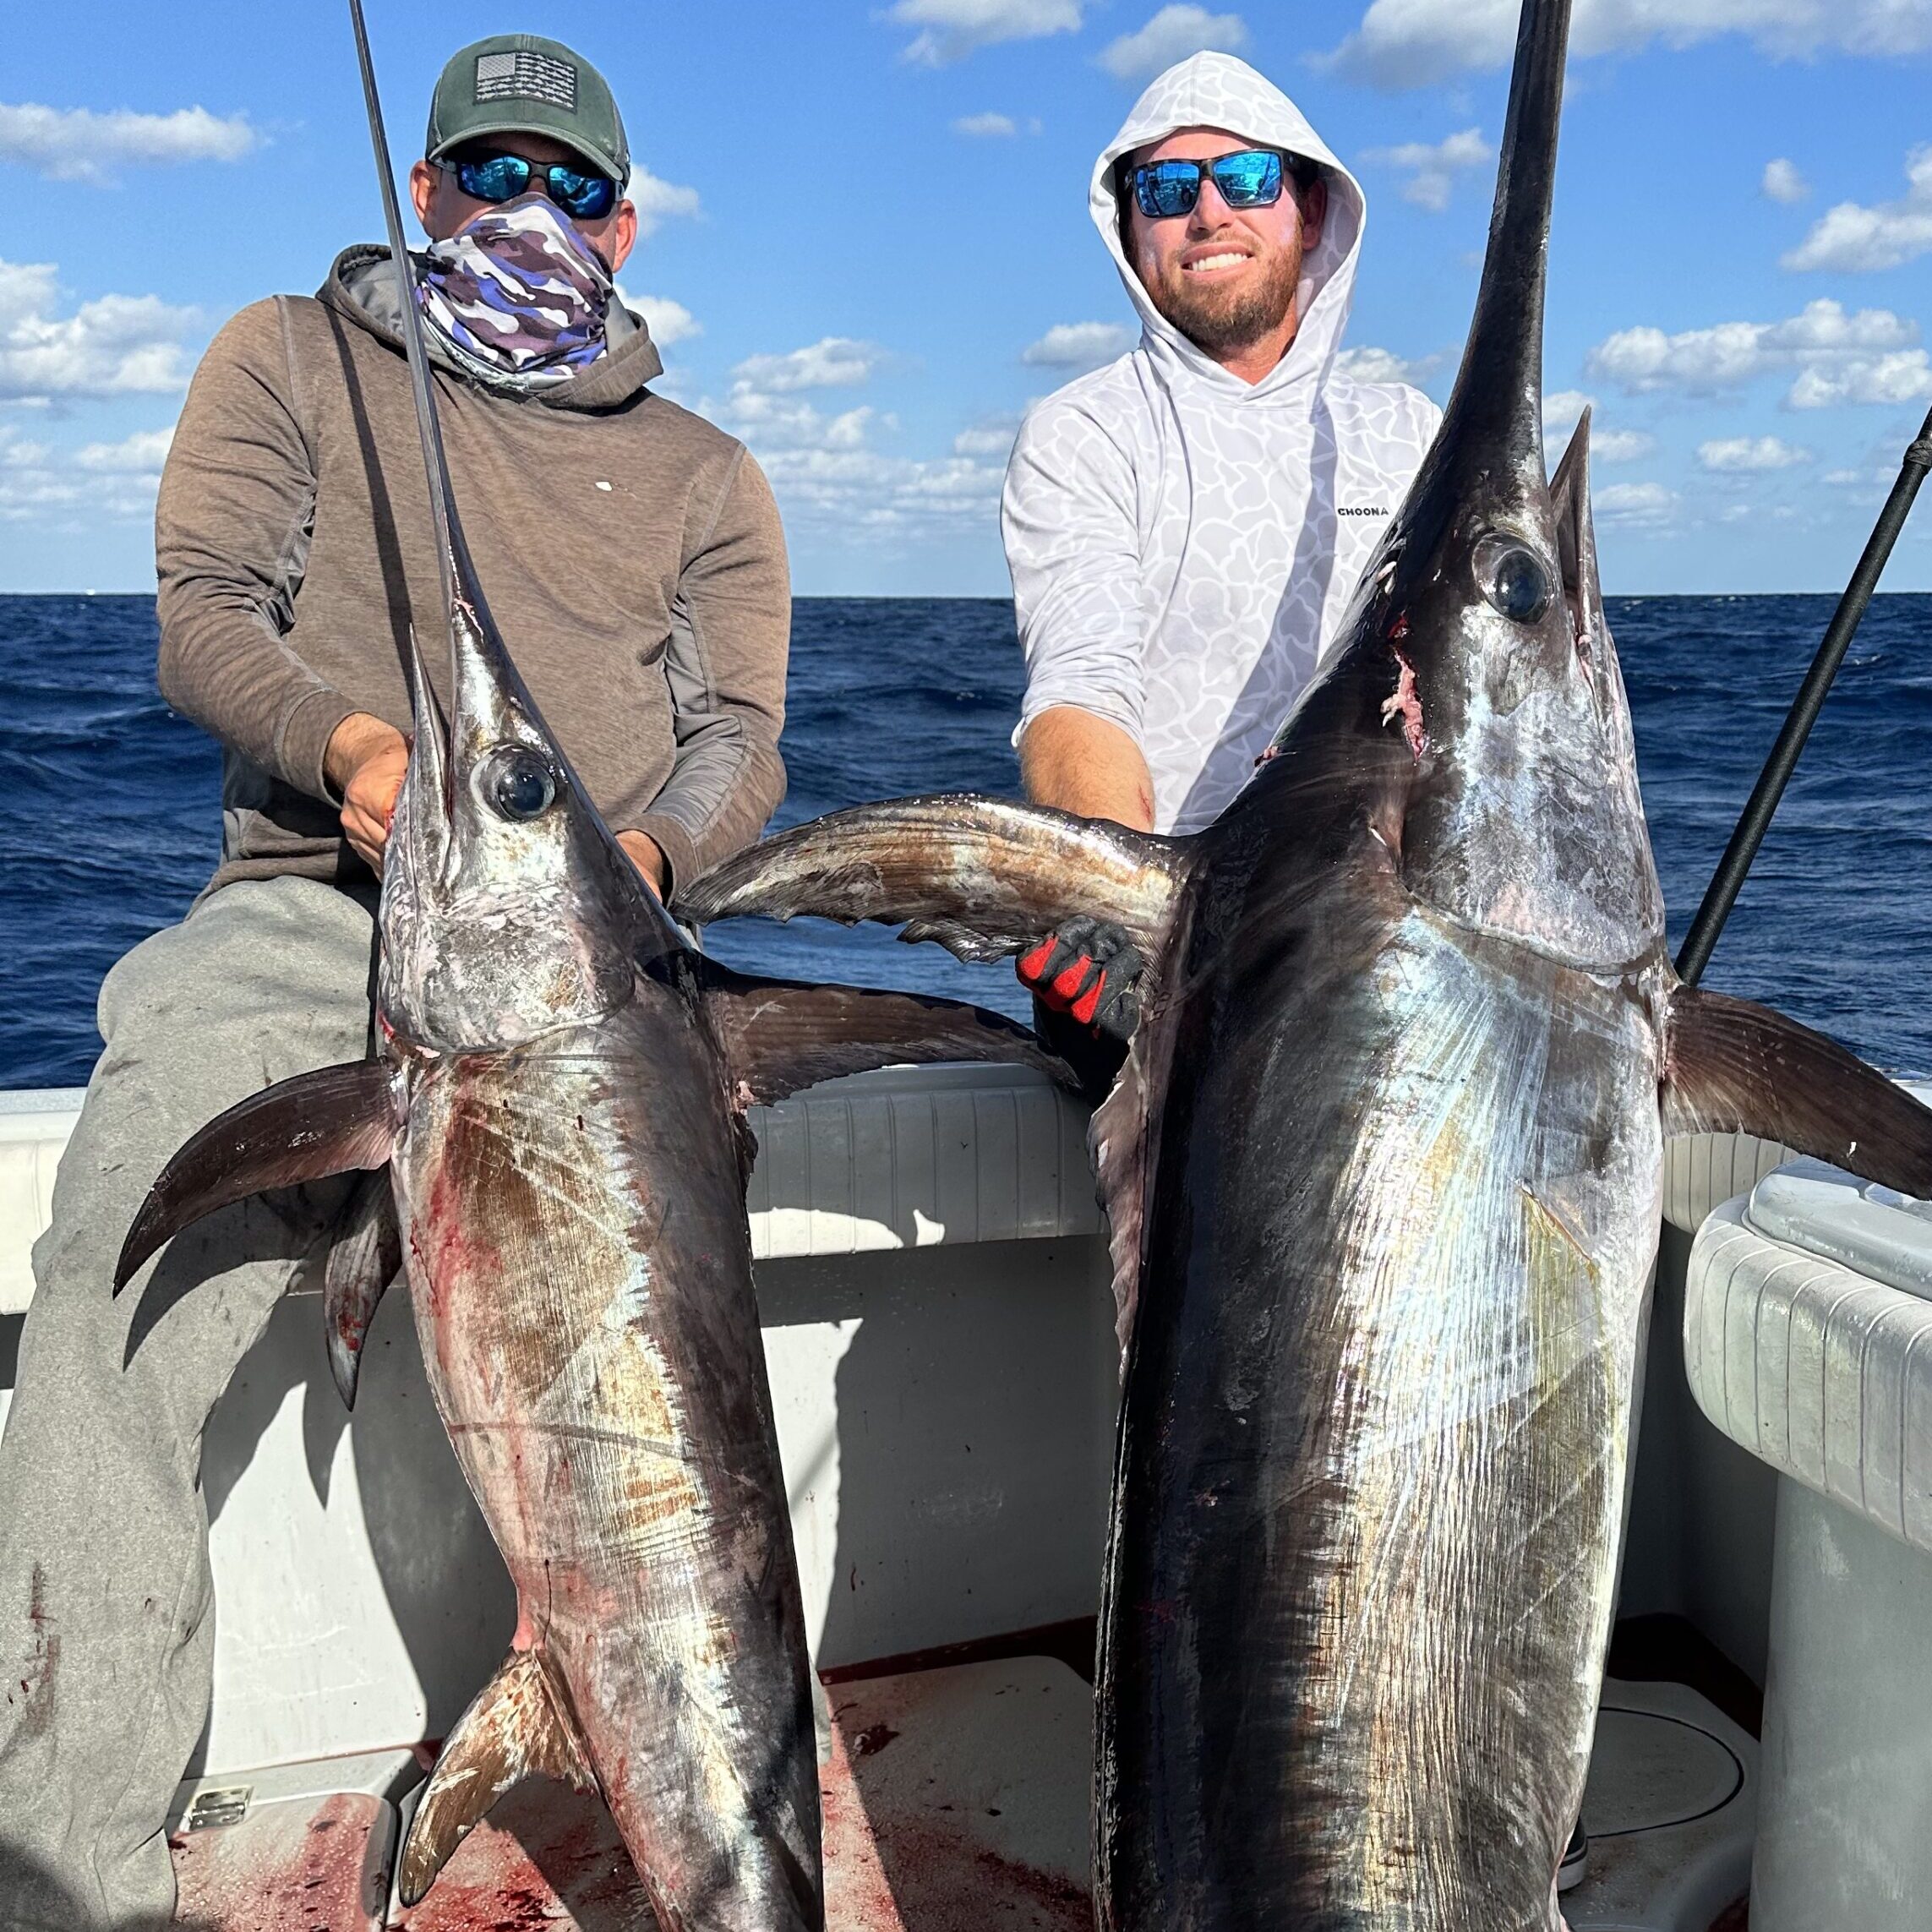 Two clients on a sword fishing charter proudly holding up two large swordfish they've caught, smiling with the ocean in the background.